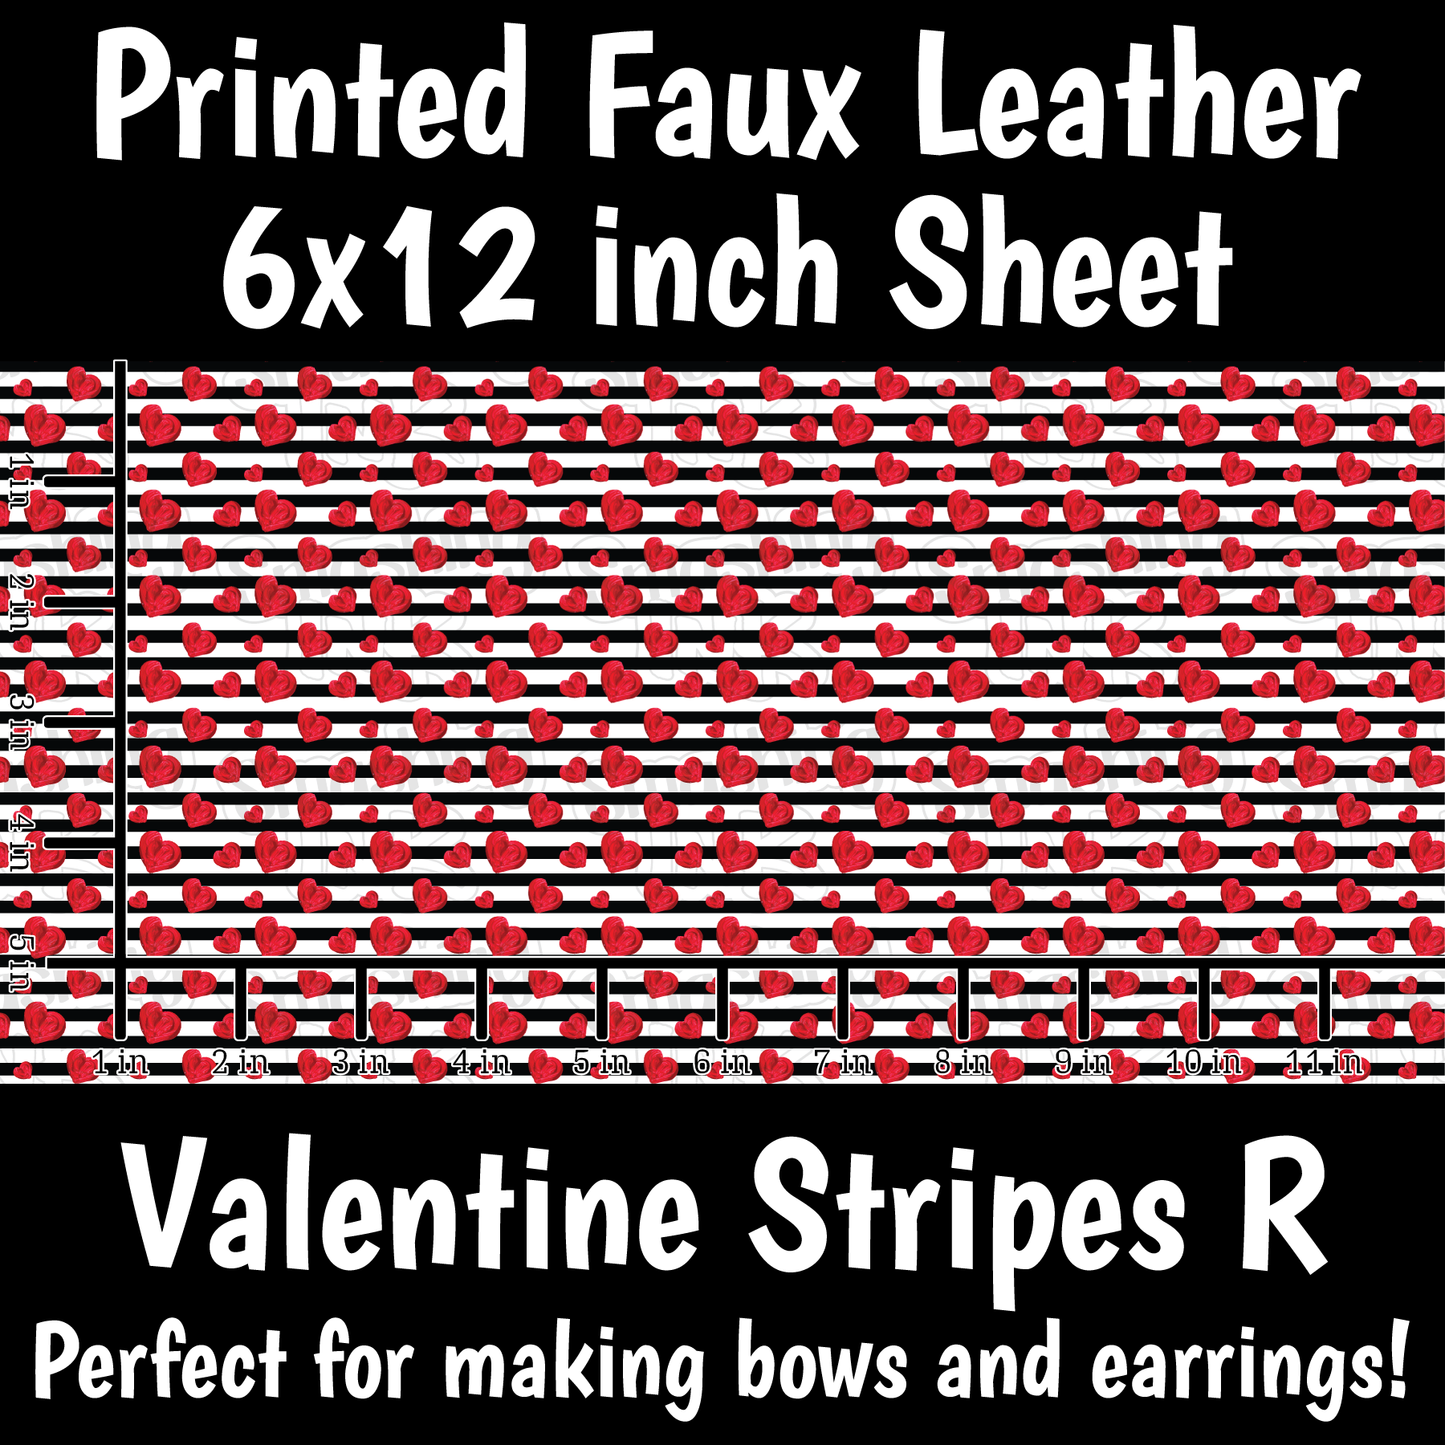 Valentine Stripes R - Faux Leather Sheet (SHIPS IN 3 BUS DAYS)